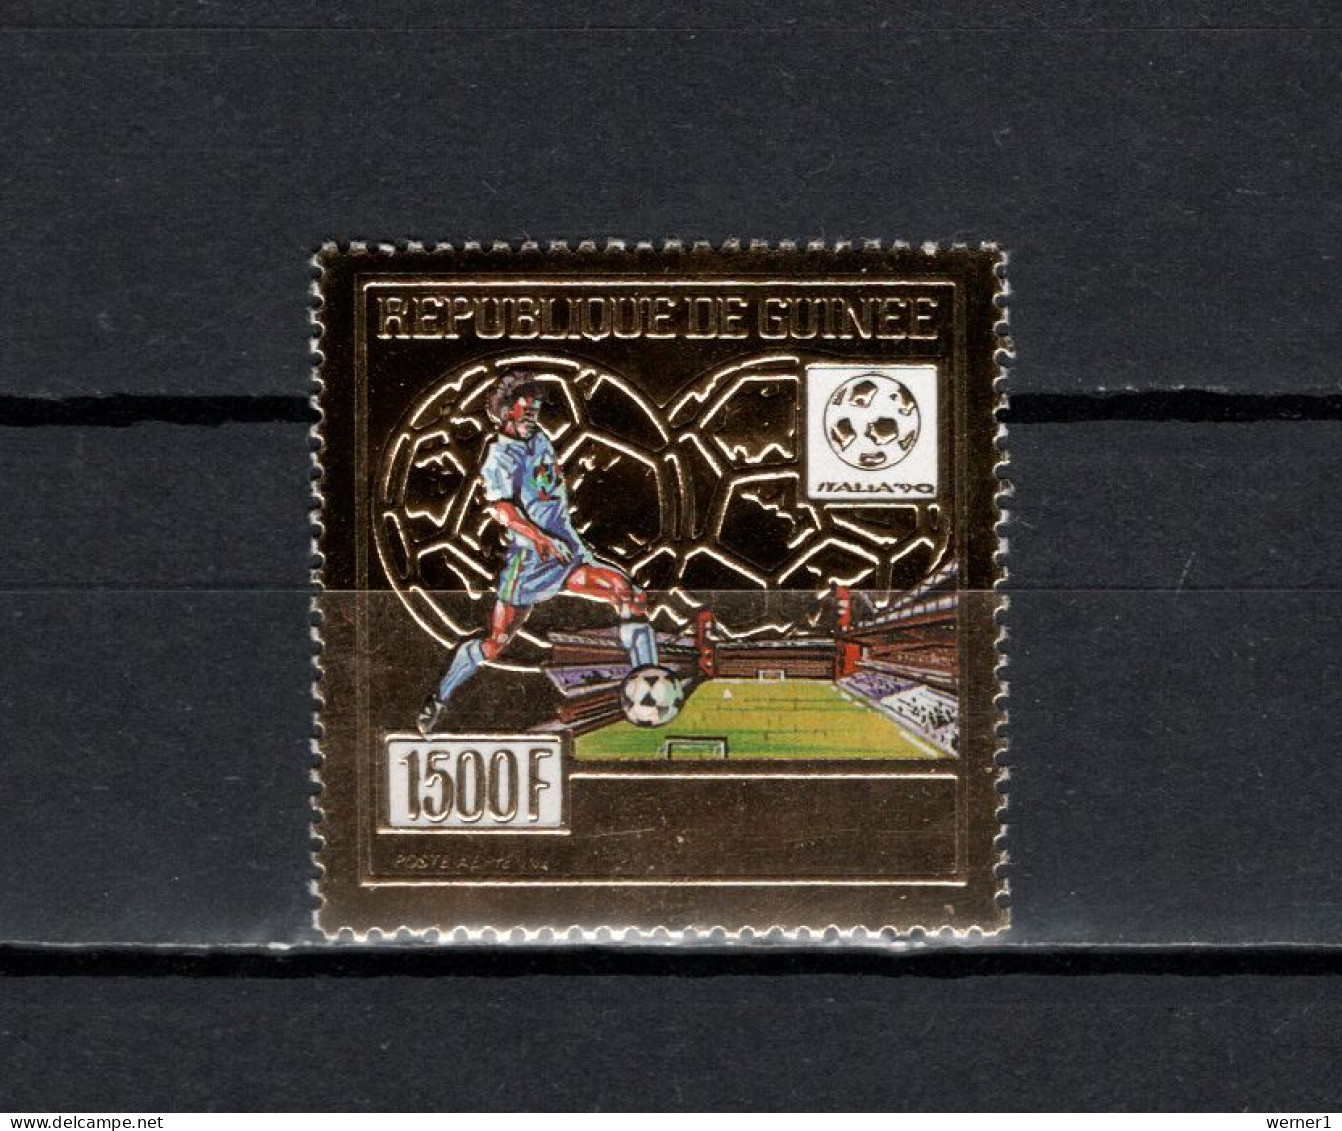 Guinea 1990 Football Soccer World Cup Gold Stamp MNH - 1990 – Italien